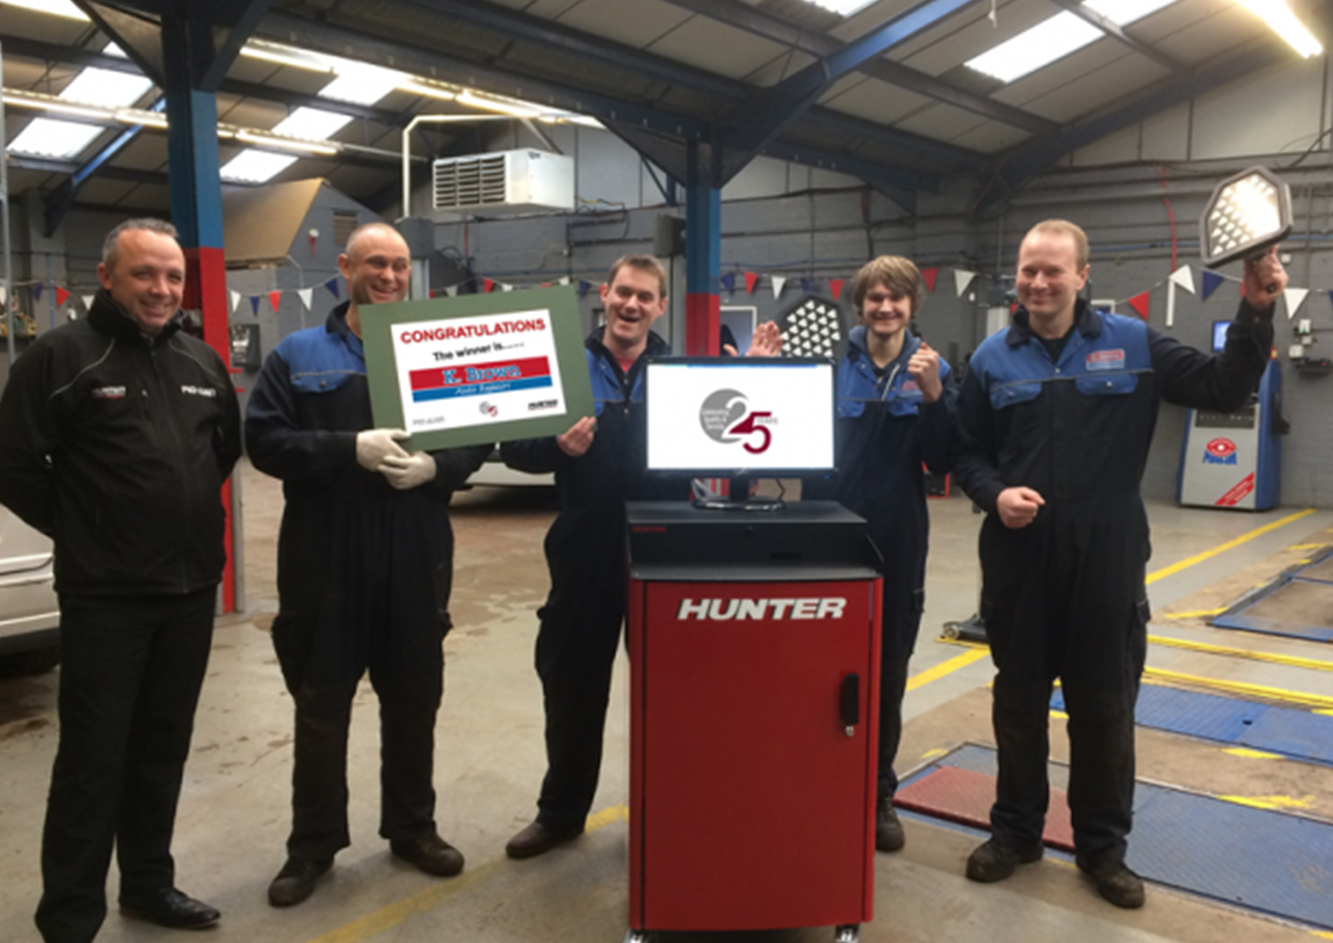 The Winner of our 25th Anniversary wheel alignment prize is…..